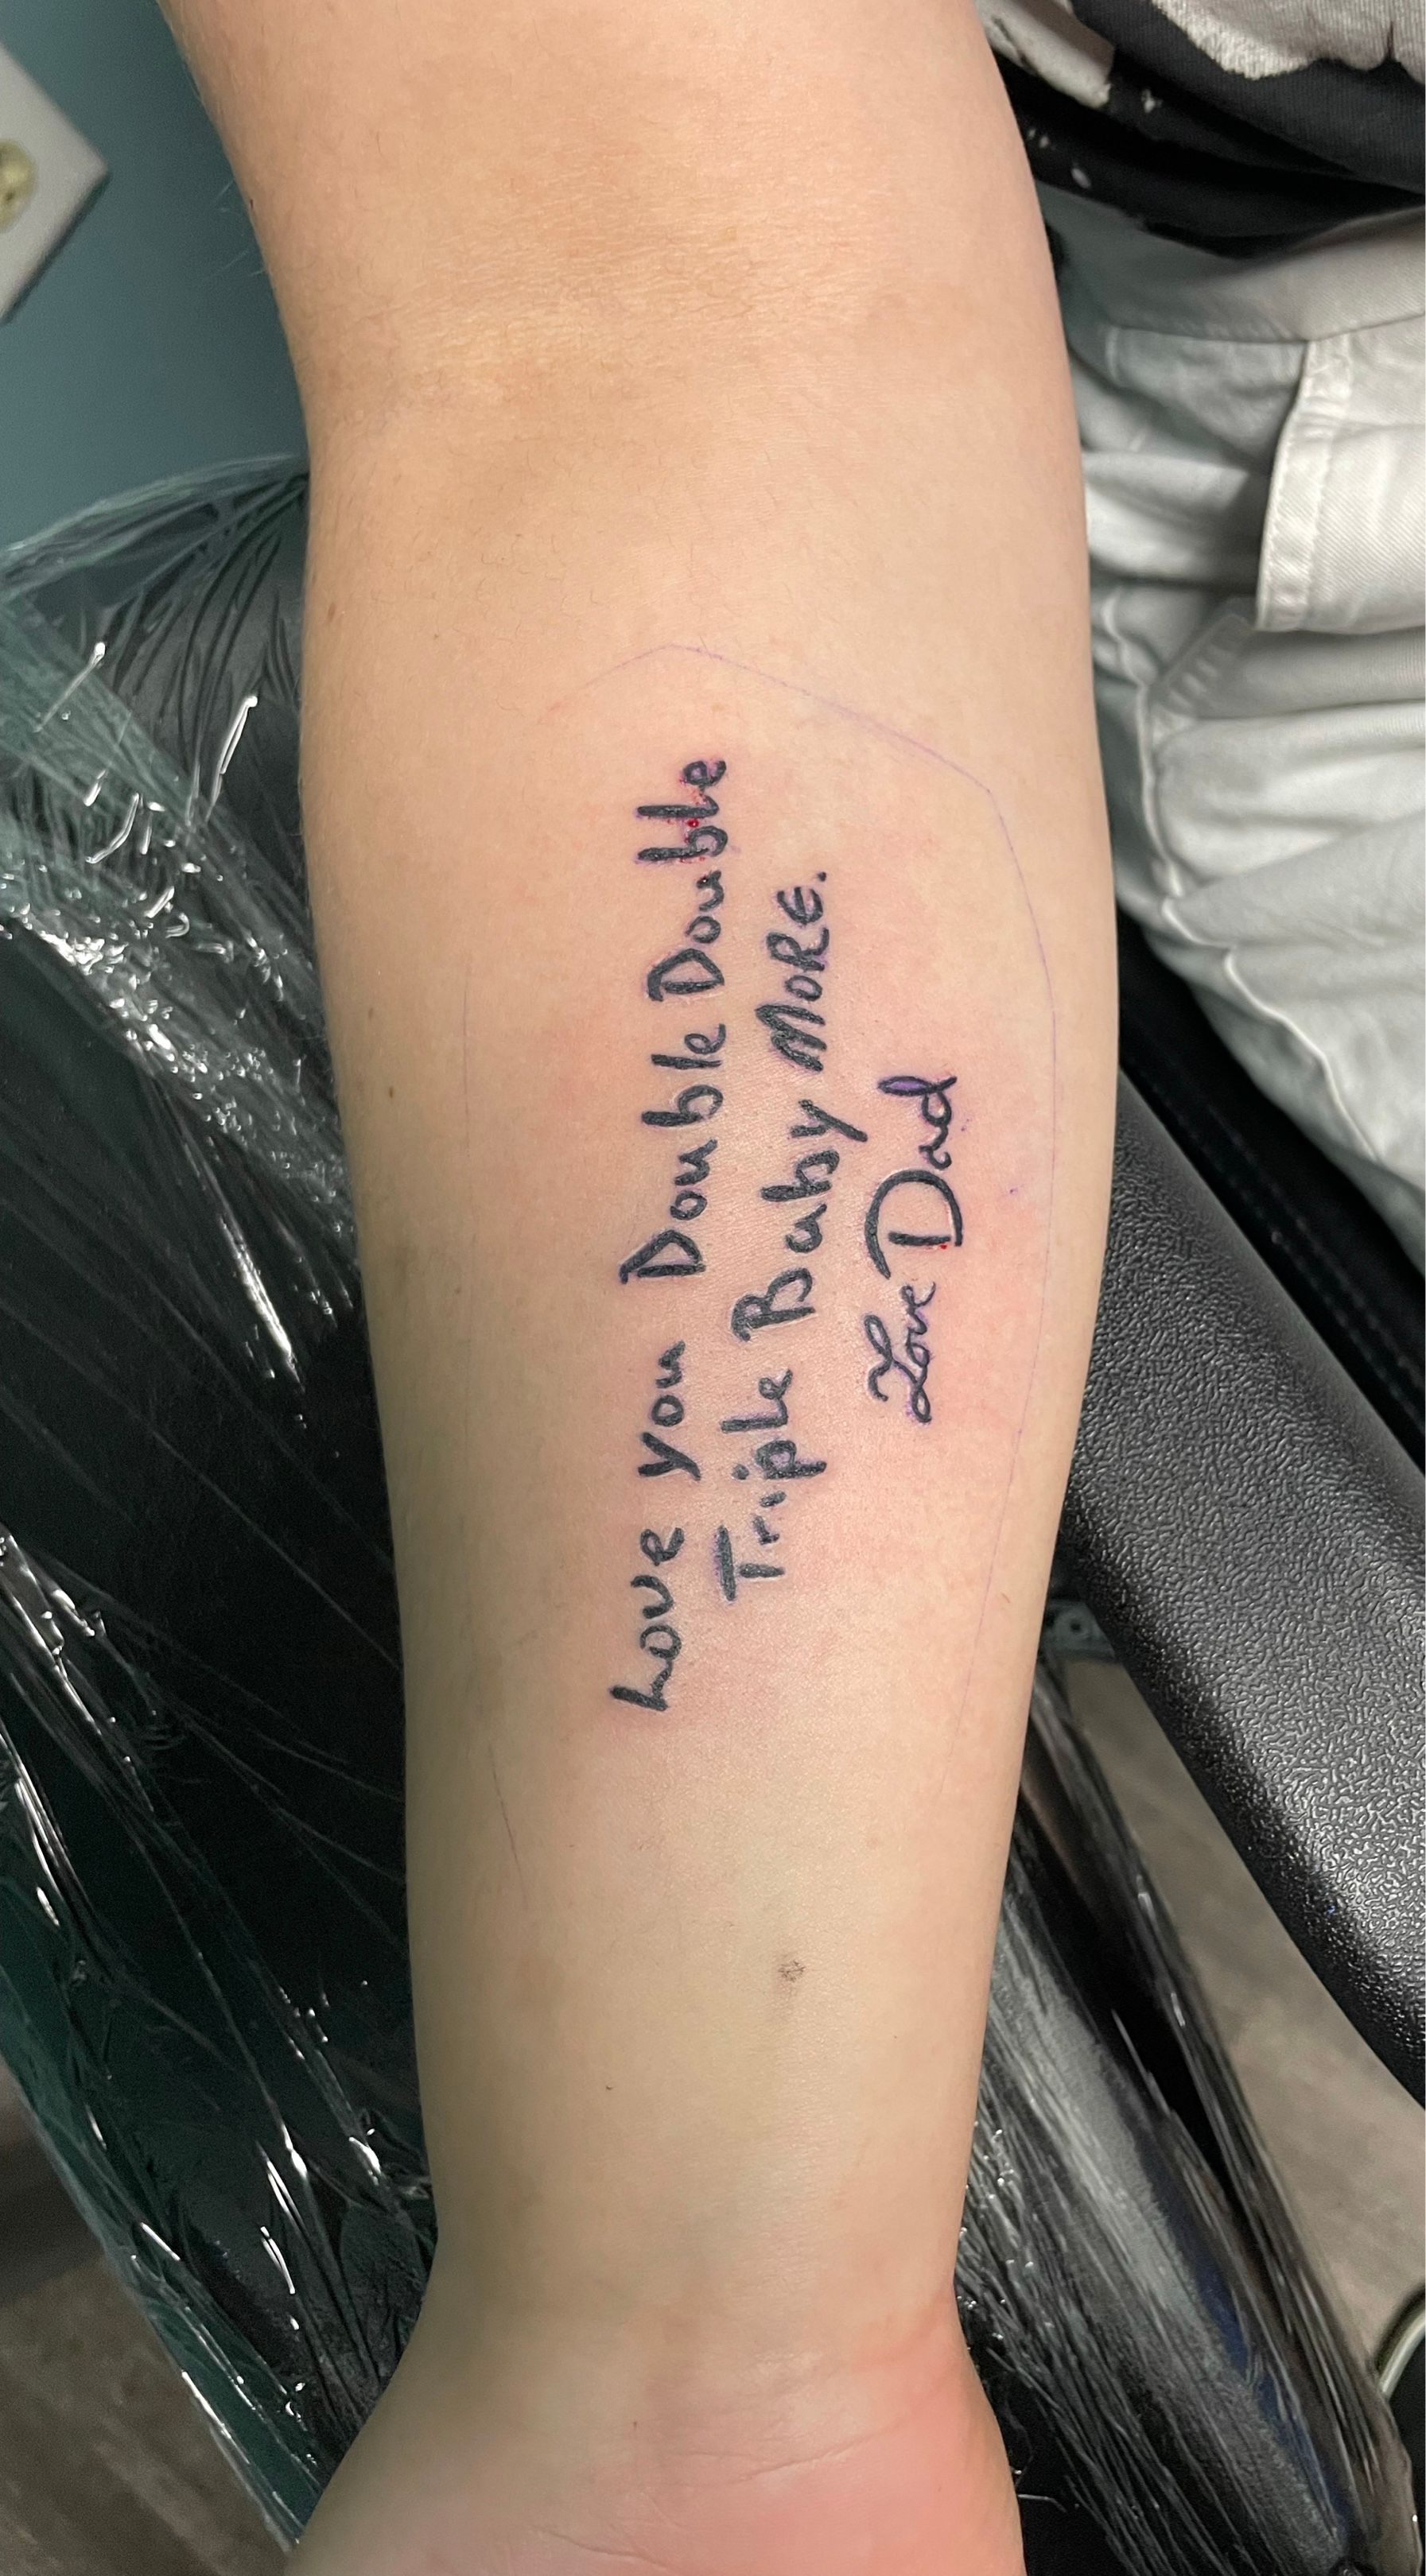 𝓶𝓼𝓛𝓲𝓼𝓪𝓢𝓬𝓮𝓷𝓽𝓼 on Twitter I am so happy how my tattoo turned  out in memory of my dad He is my Guardian AngelHe was taking away too  early and I wish so much